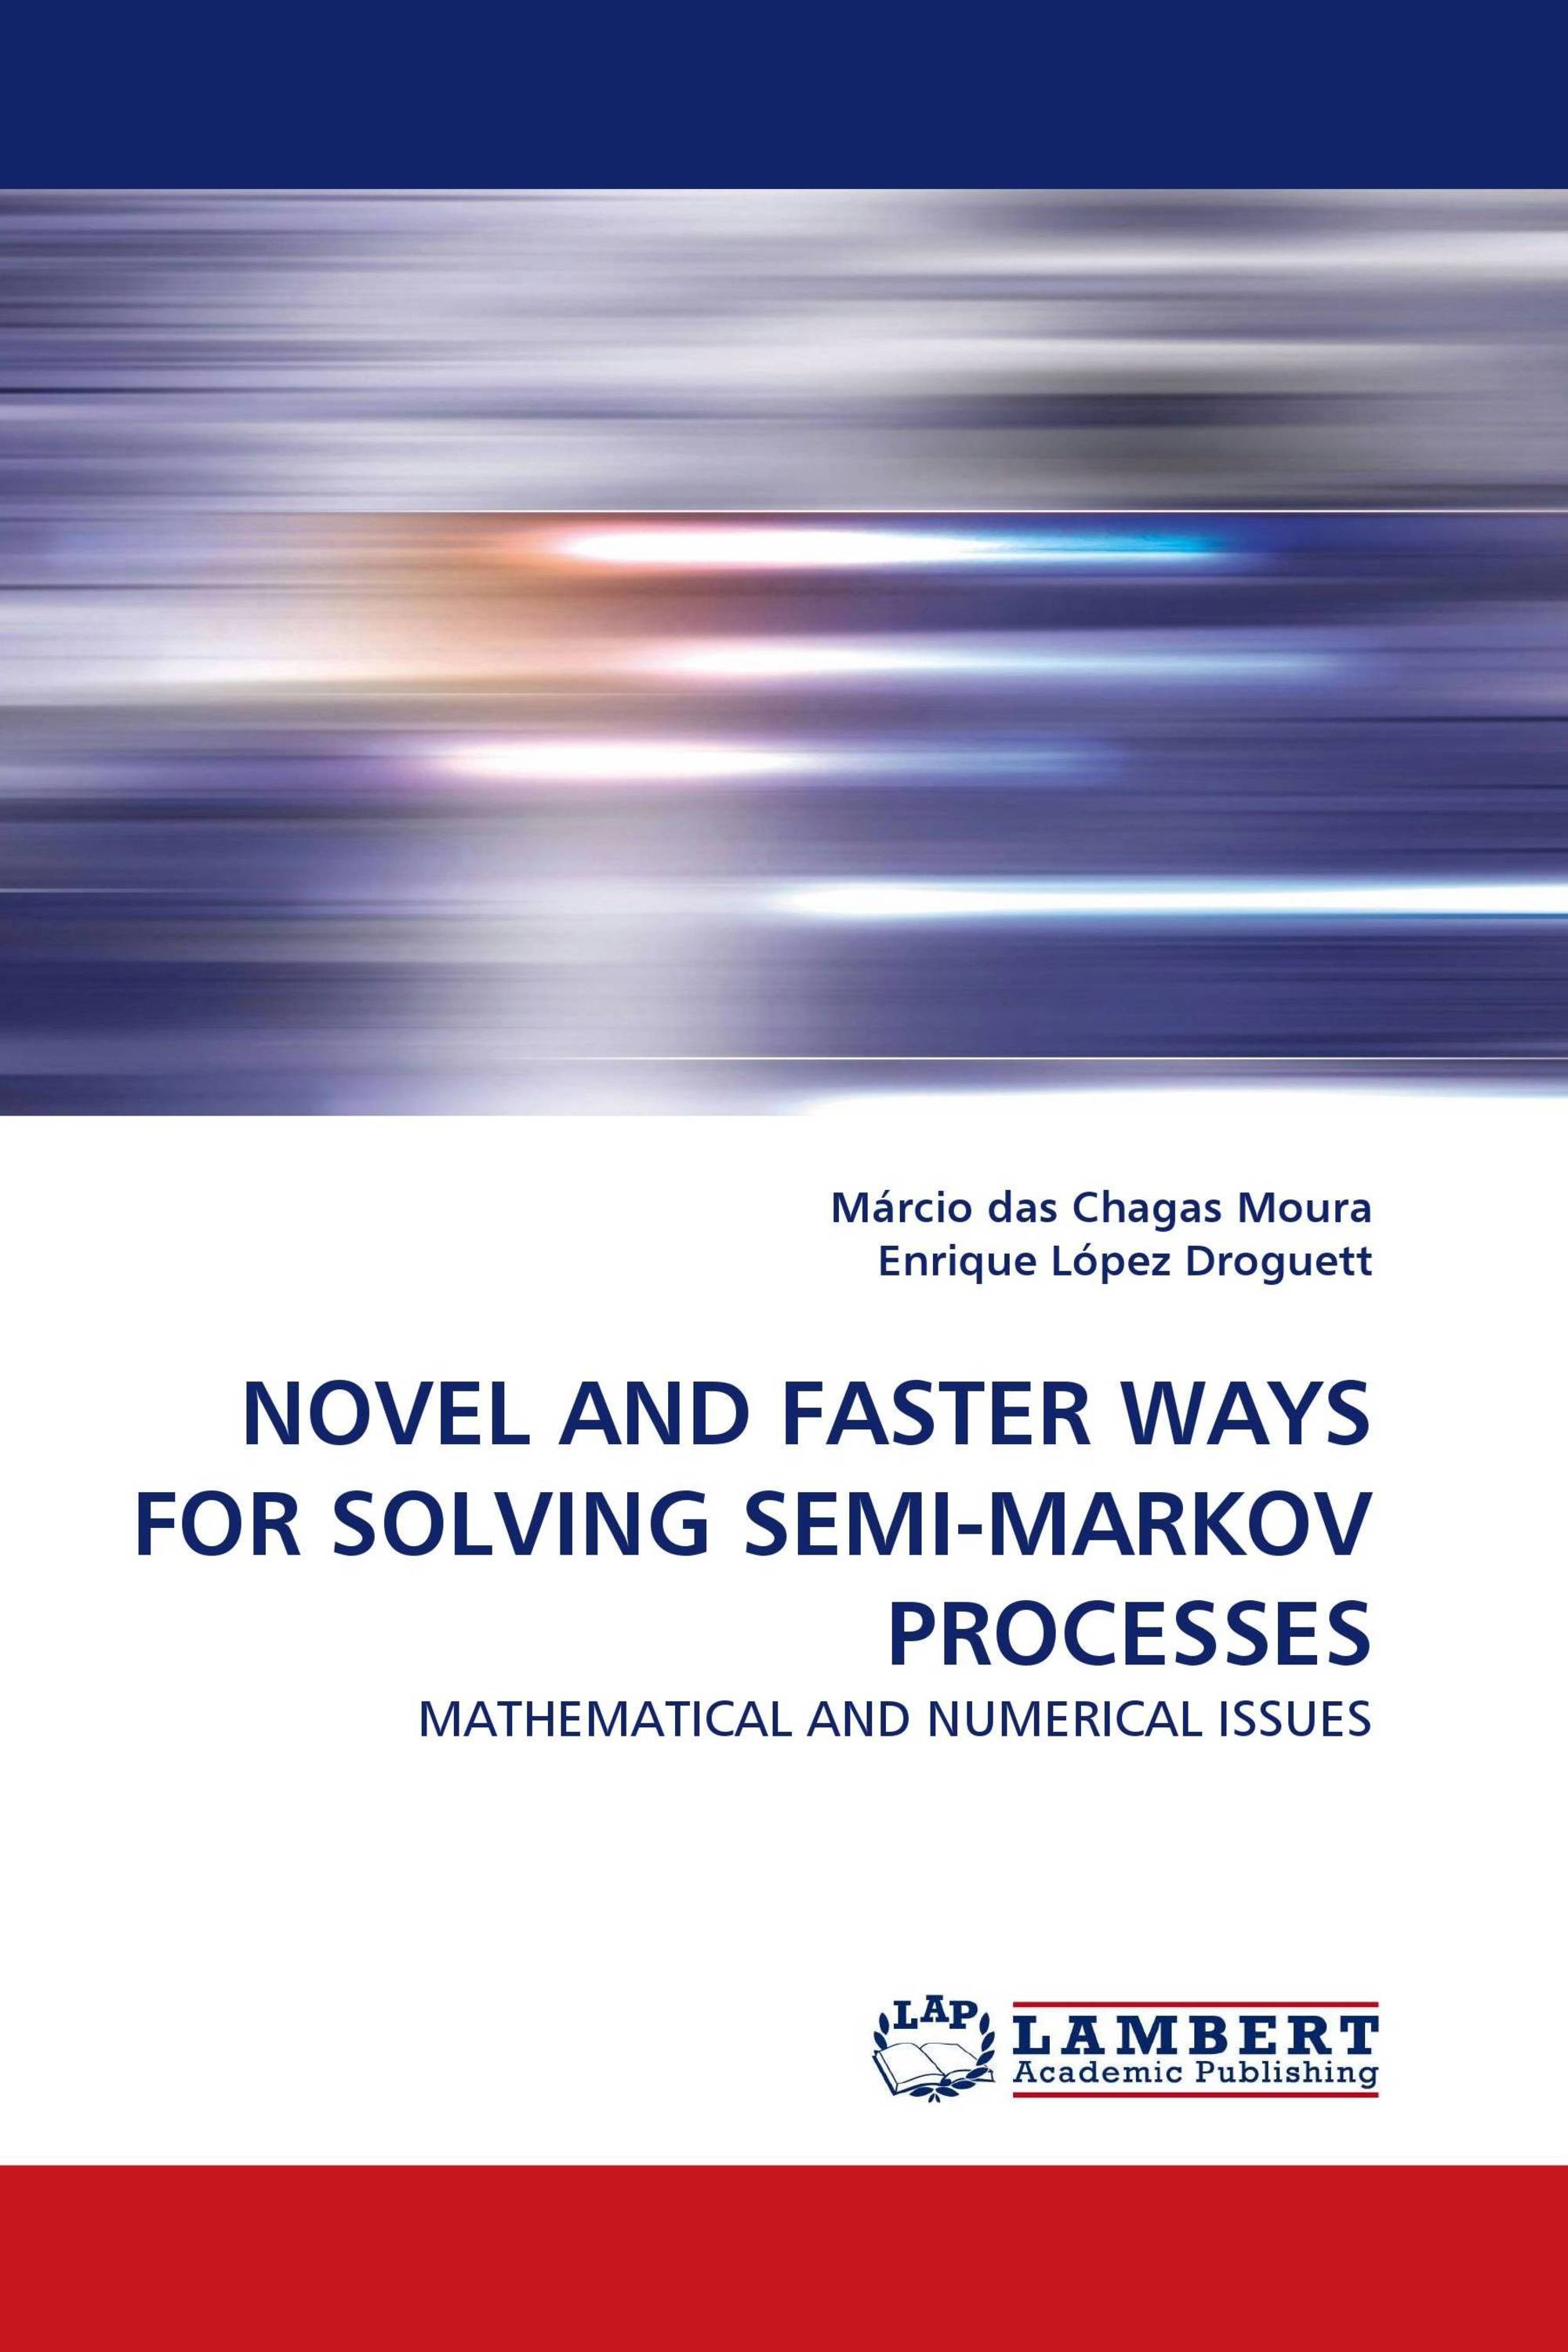 NOVEL AND FASTER WAYS FOR SOLVING SEMI-MARKOV PROCESSES